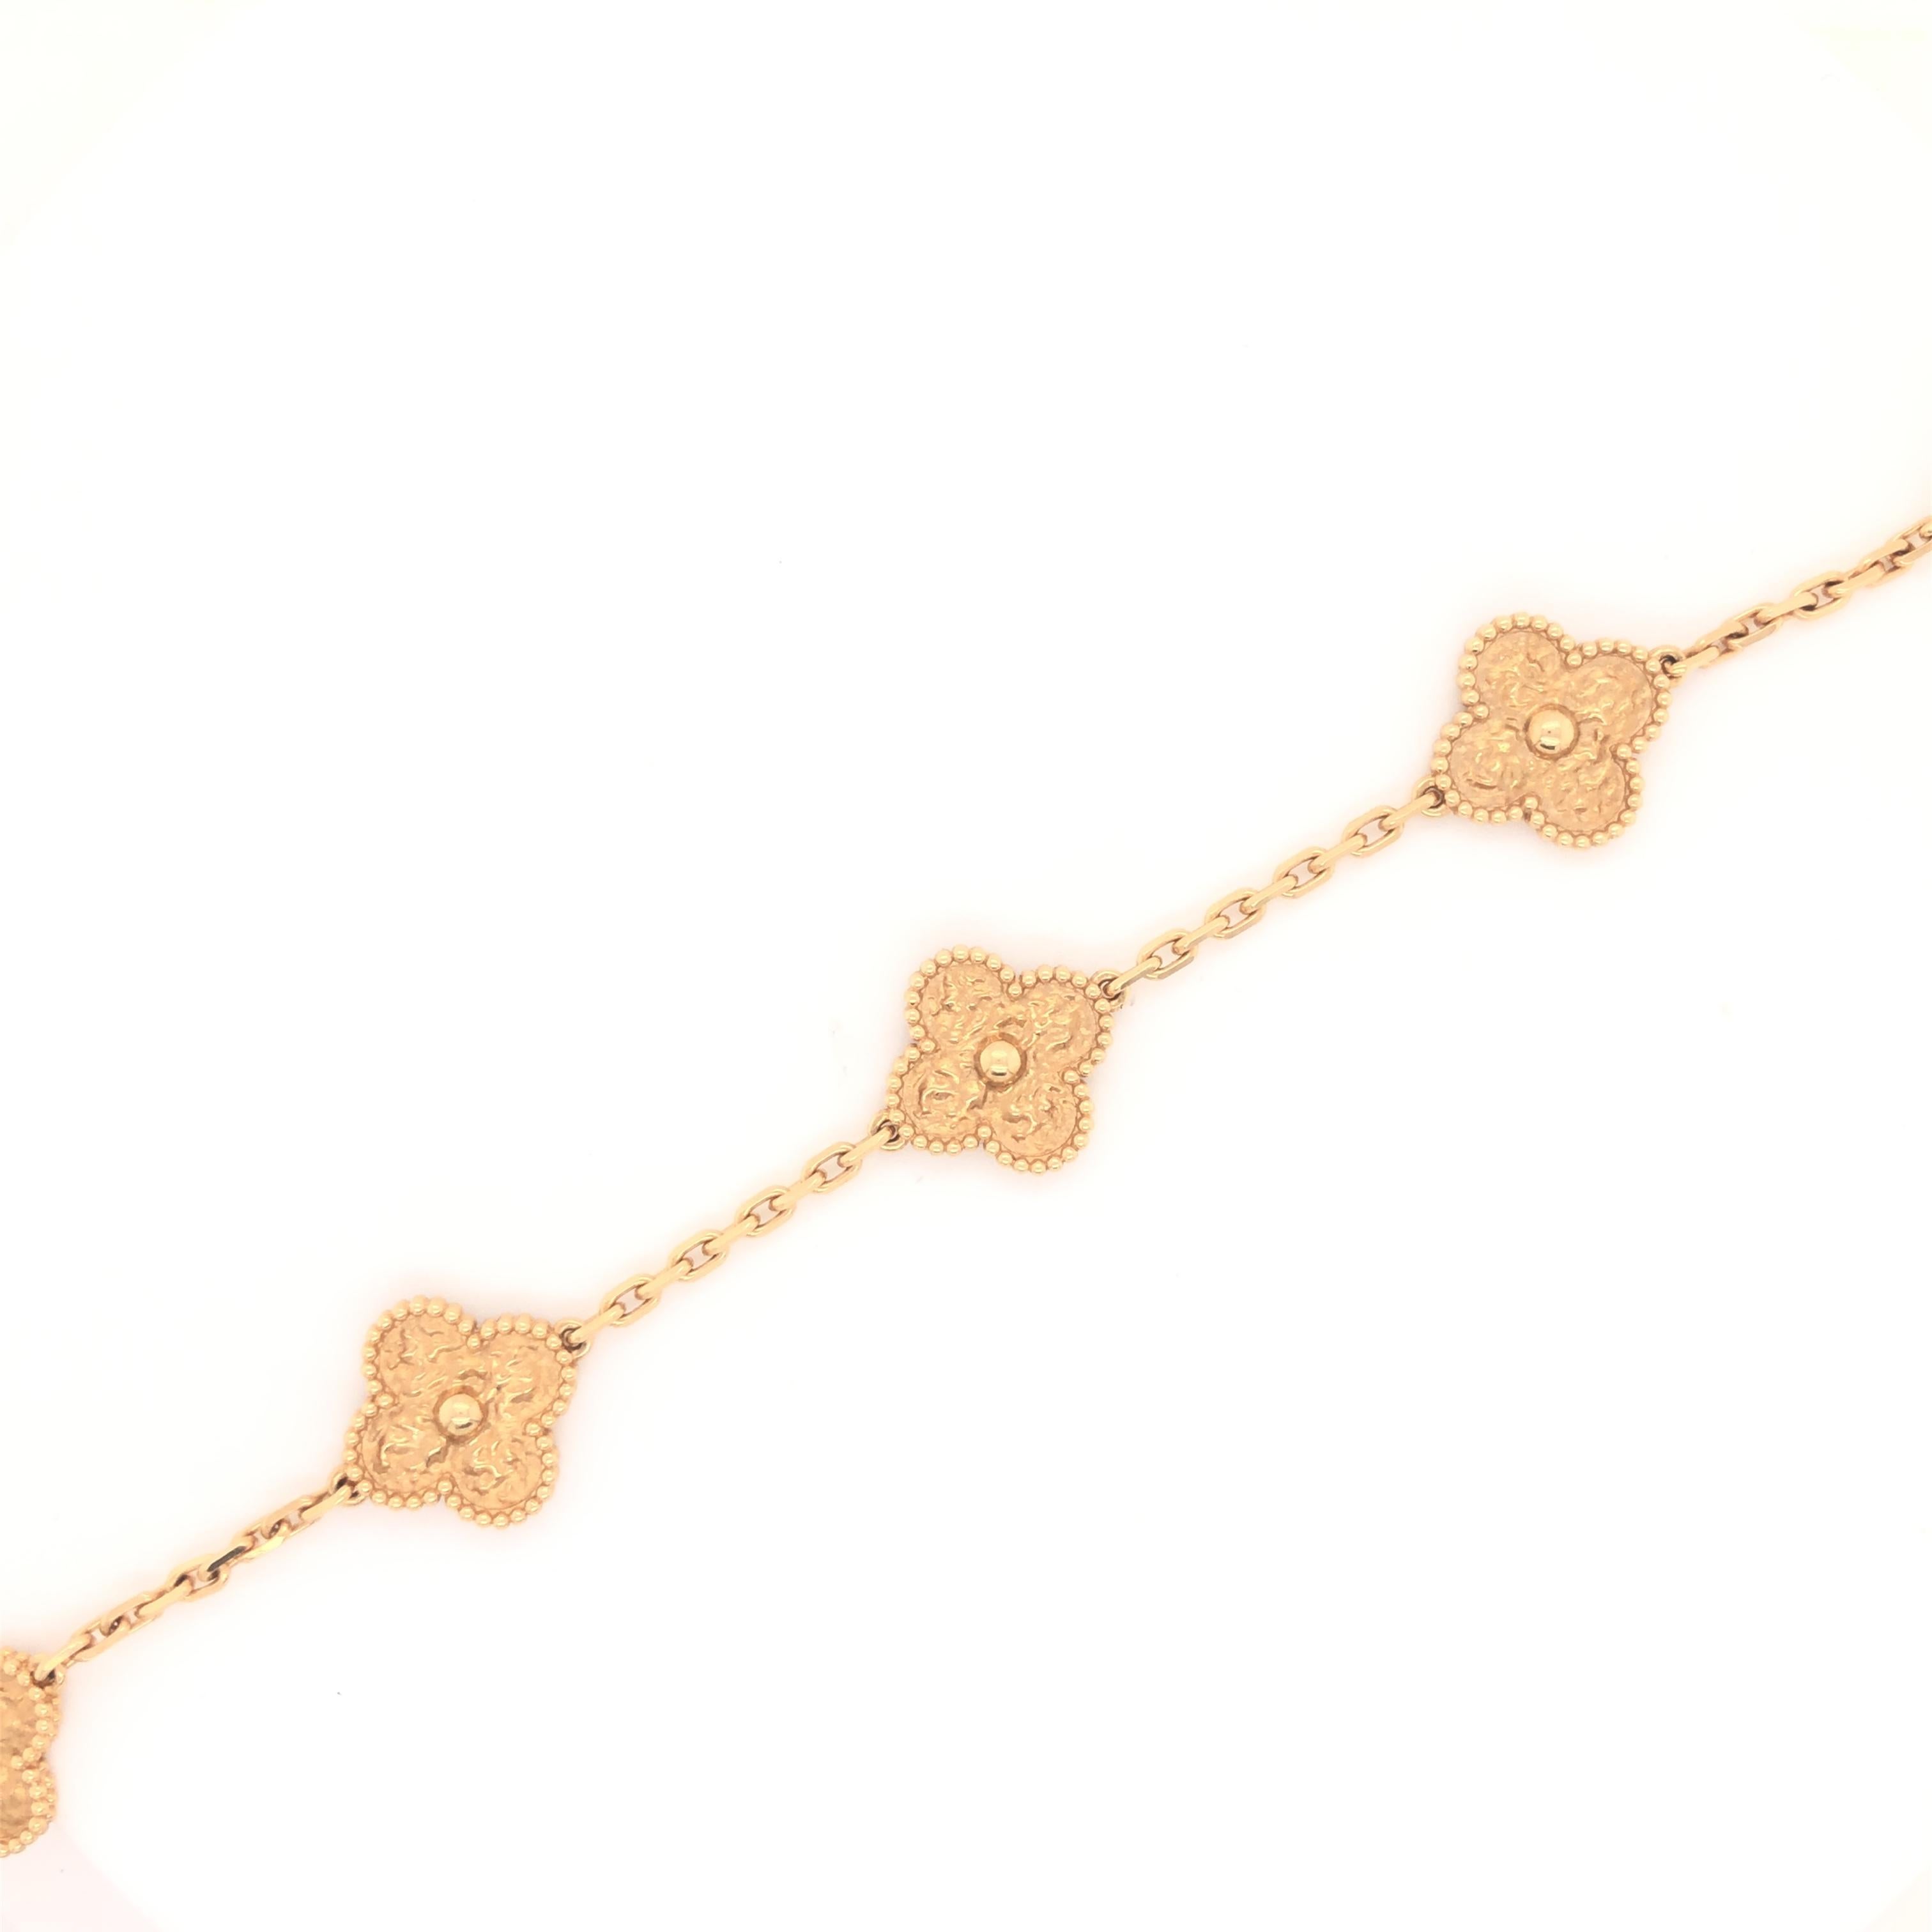 Faithful to the very first Alhambra jewel created in 1968, the Vintage Alhambra creations by Van Cleef & Arpels are distinguished by their unique, timeless elegance. Inspired by the clover leaf, this iconic design is solid 18k golden clovers of